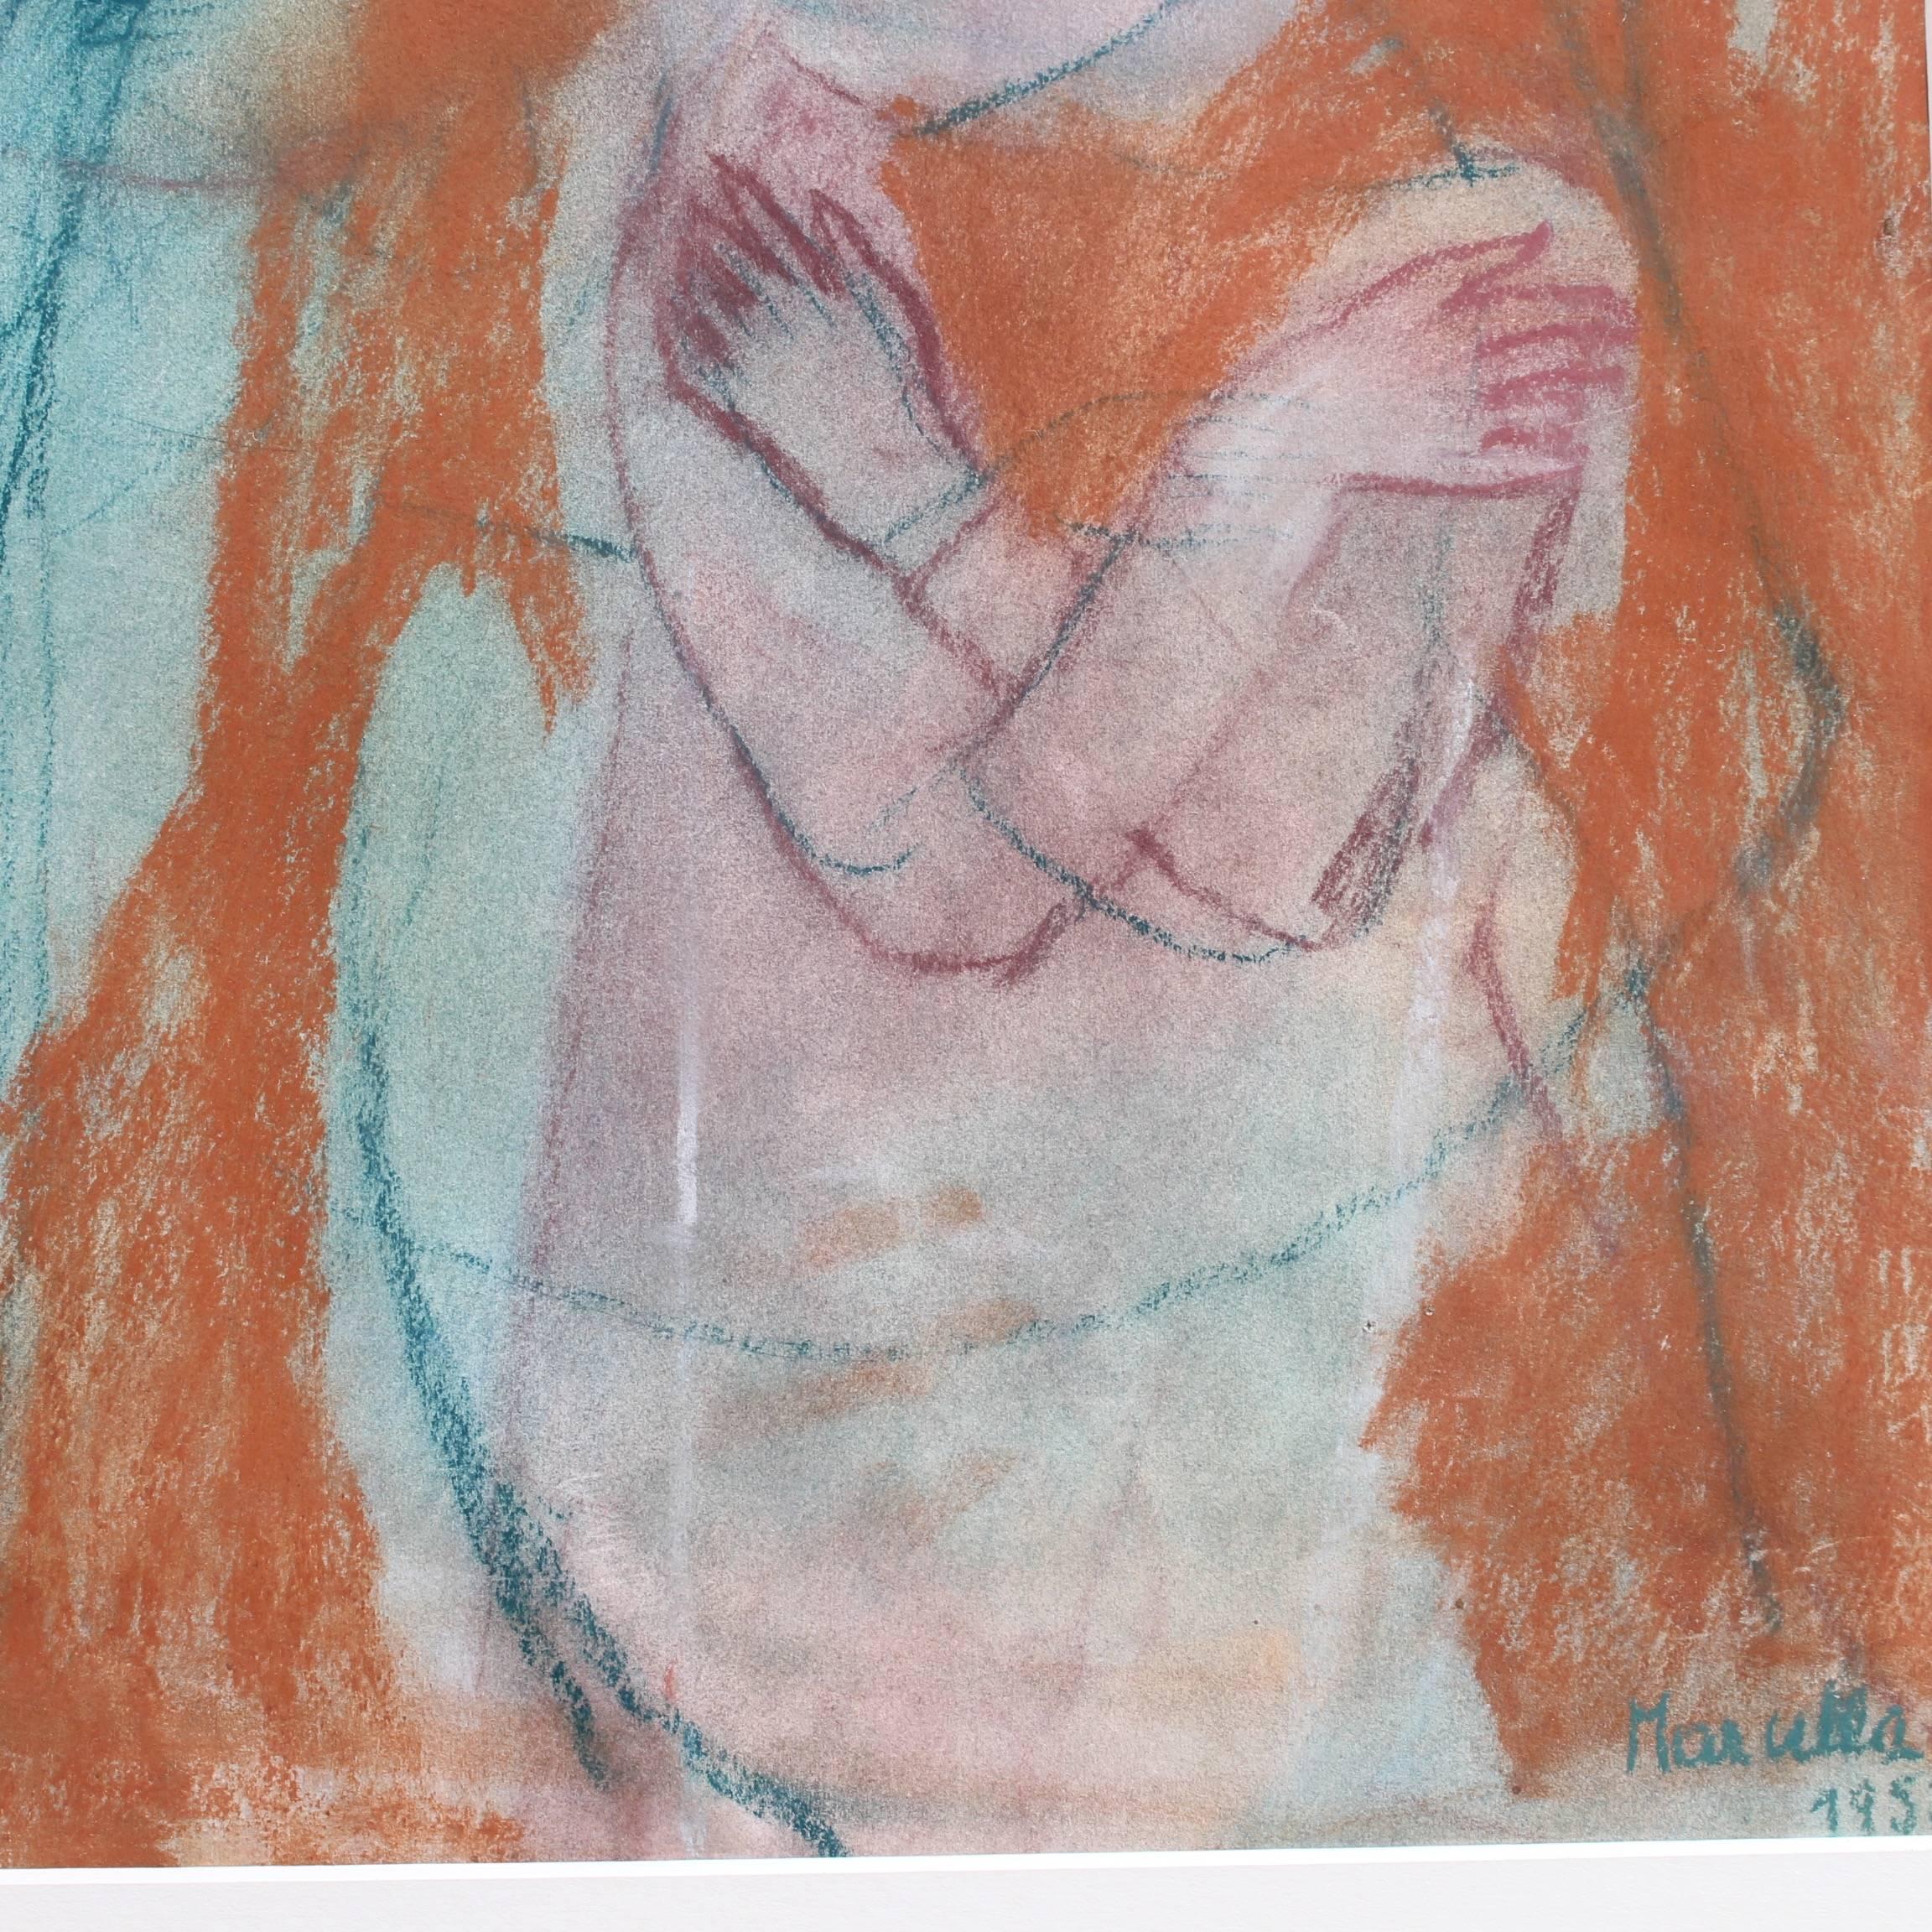 'Archangel Michael', pastels on paper, by Marcella (1958). Believers say angels visit all people before they die. Just before the moment of death, the angel visits giving those who haven't yet connected to God, a chance at salvation. The guardian